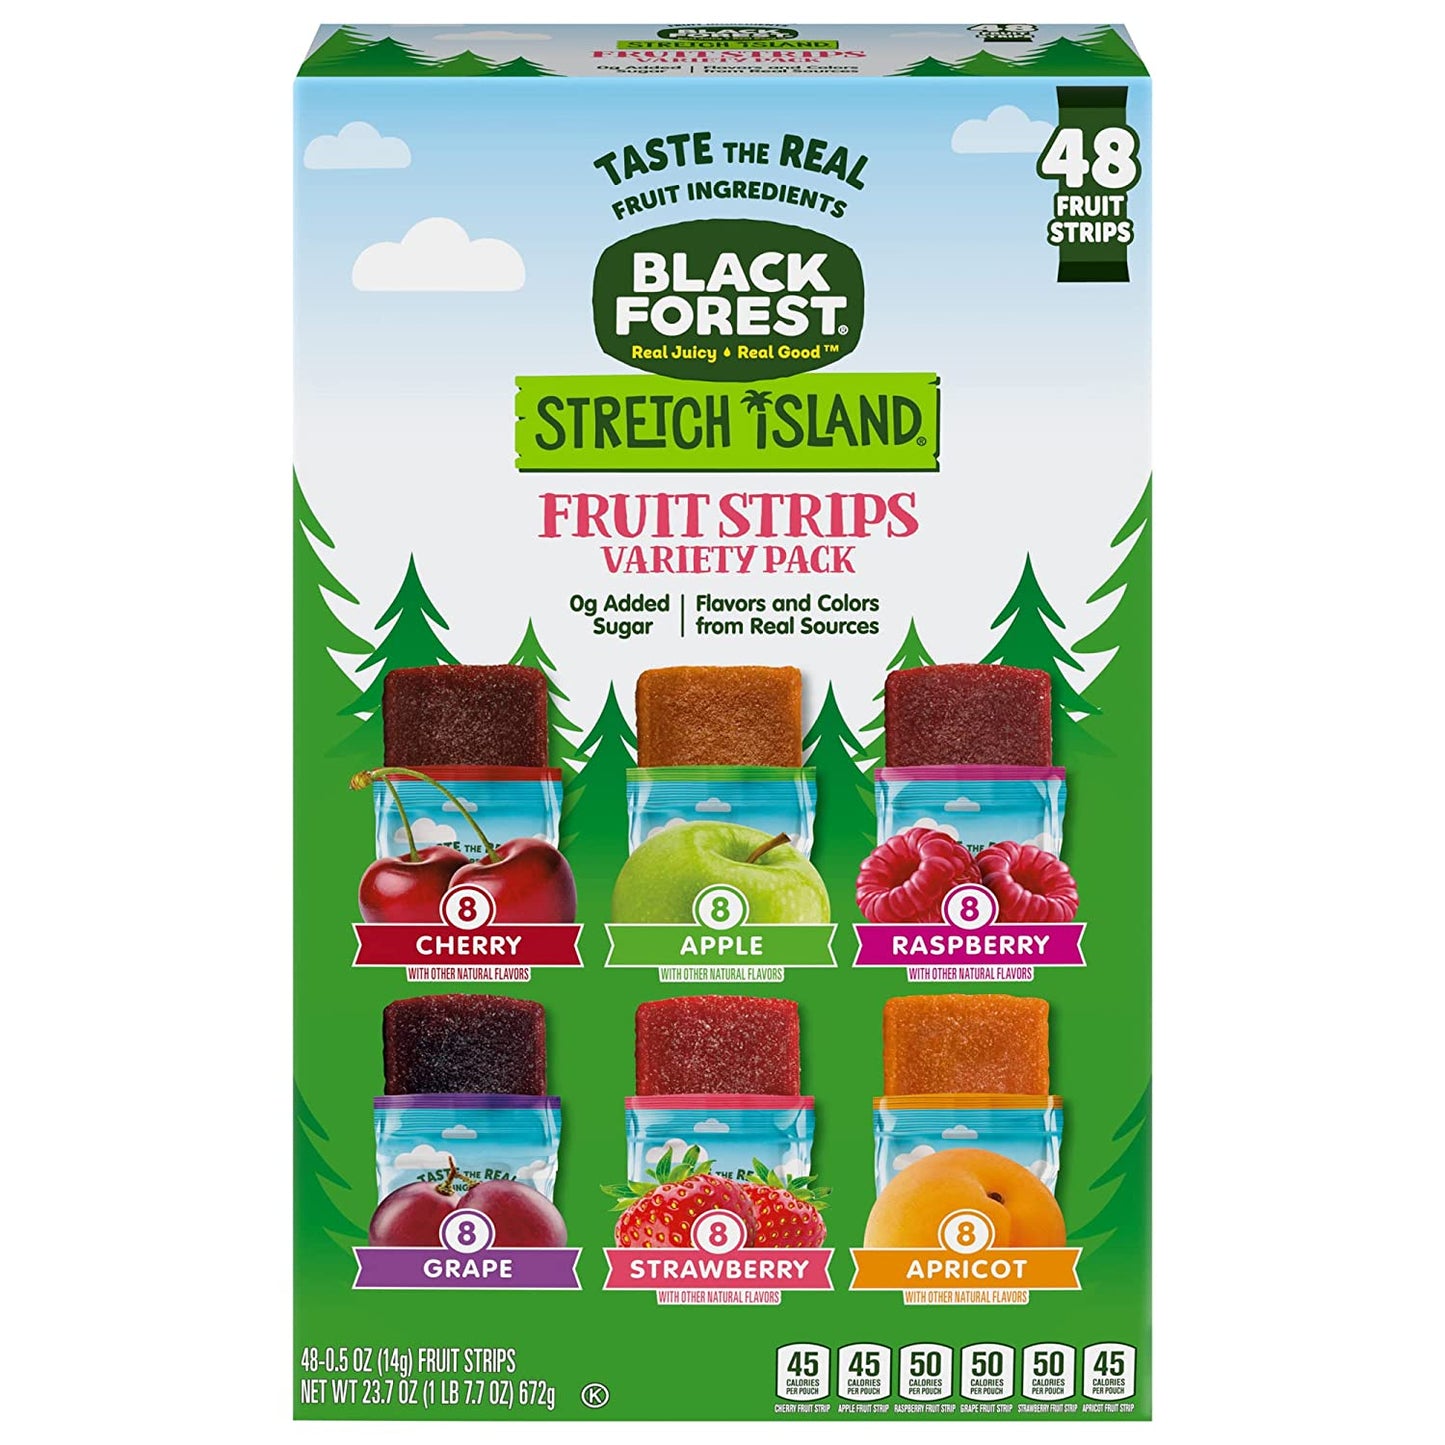 Black Forest Stretch Island Fruit Strips, Variety Pack (Cherry, Apple, Raspberry, Grape, Strawberry, Apricot), 0.5oz Strips (Pack of 48)